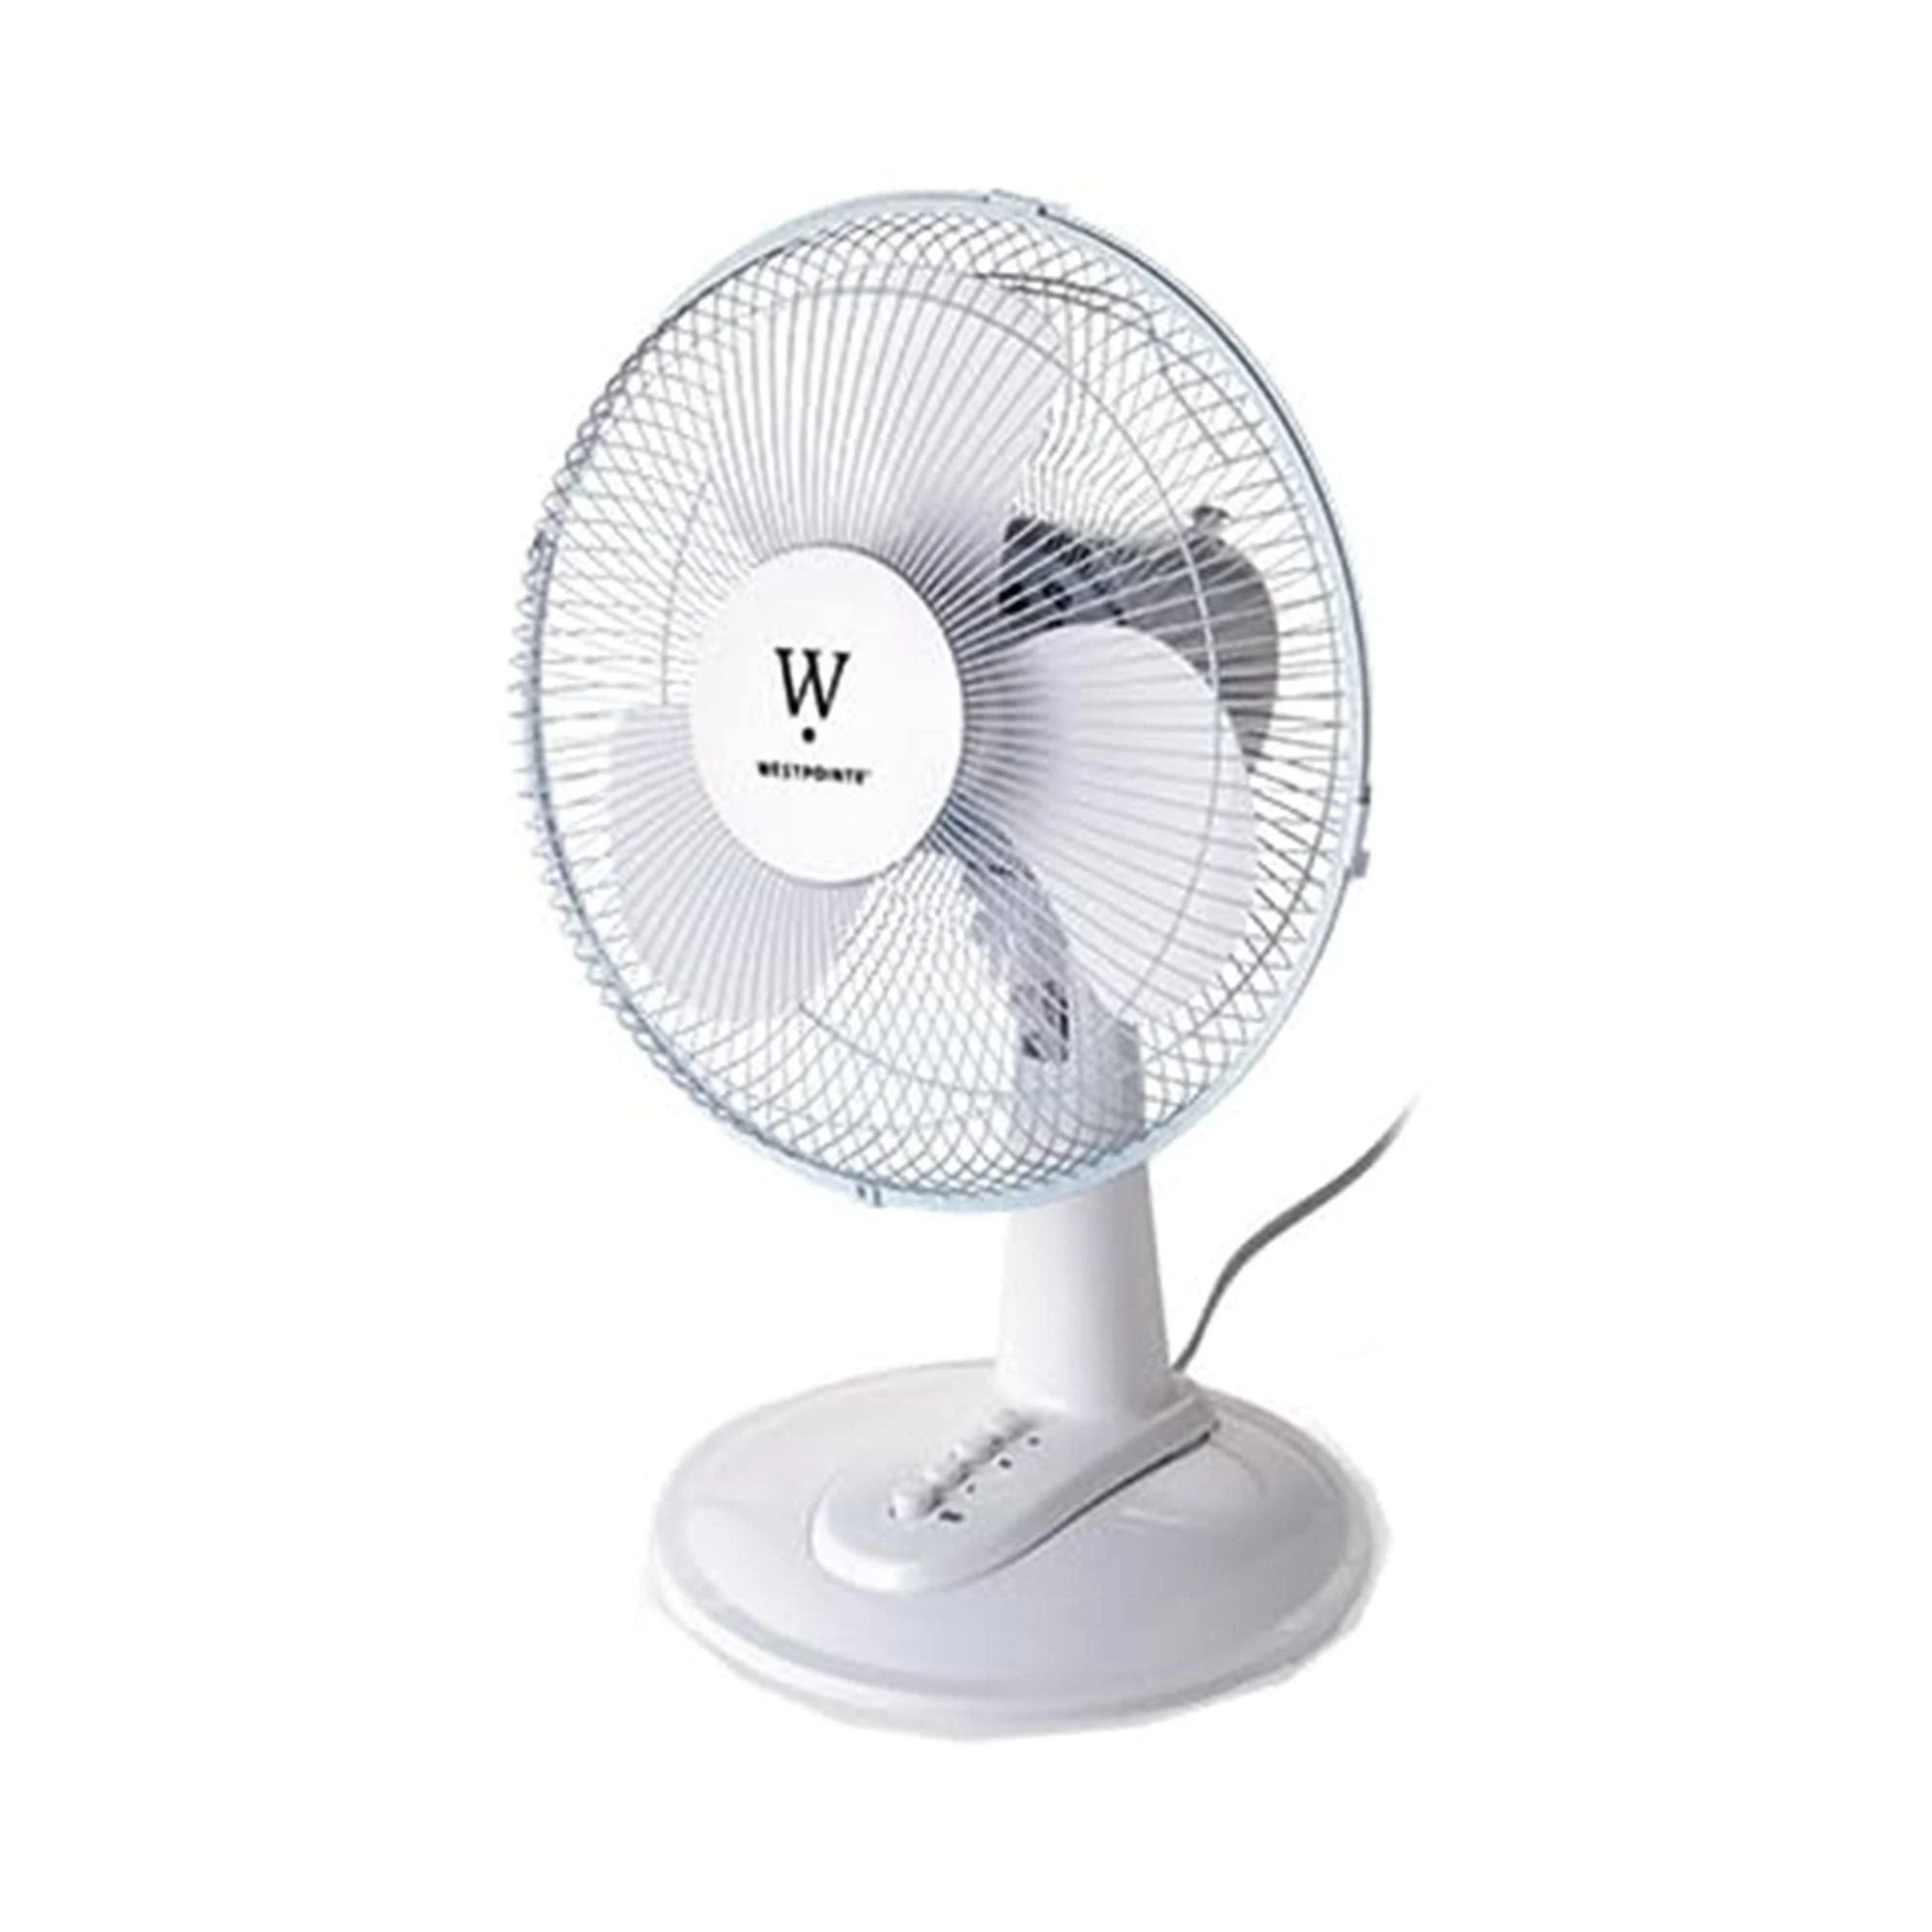 Whisper-Quiet 12-inch Table Fan for Efficient Air Circulation | Image